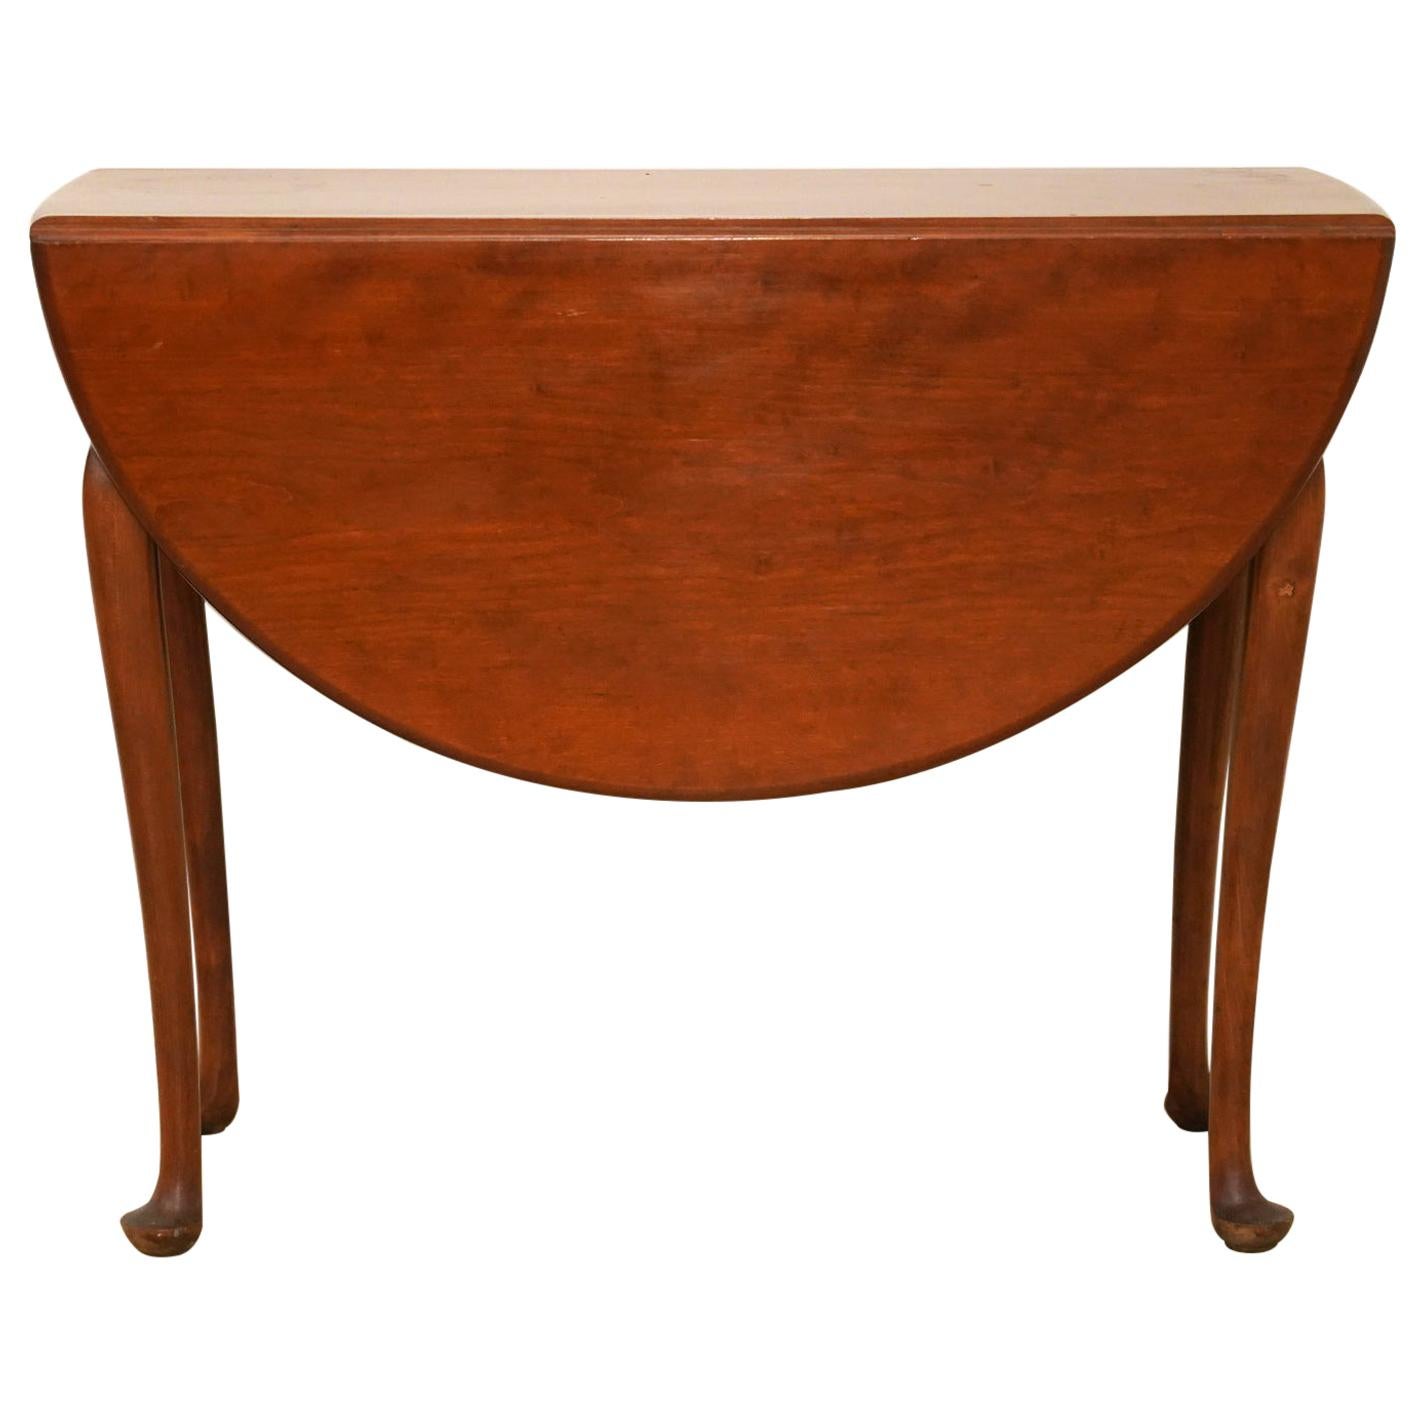 American New England Queen Anne Style Cherry Drop Leaf Table, circa 1780